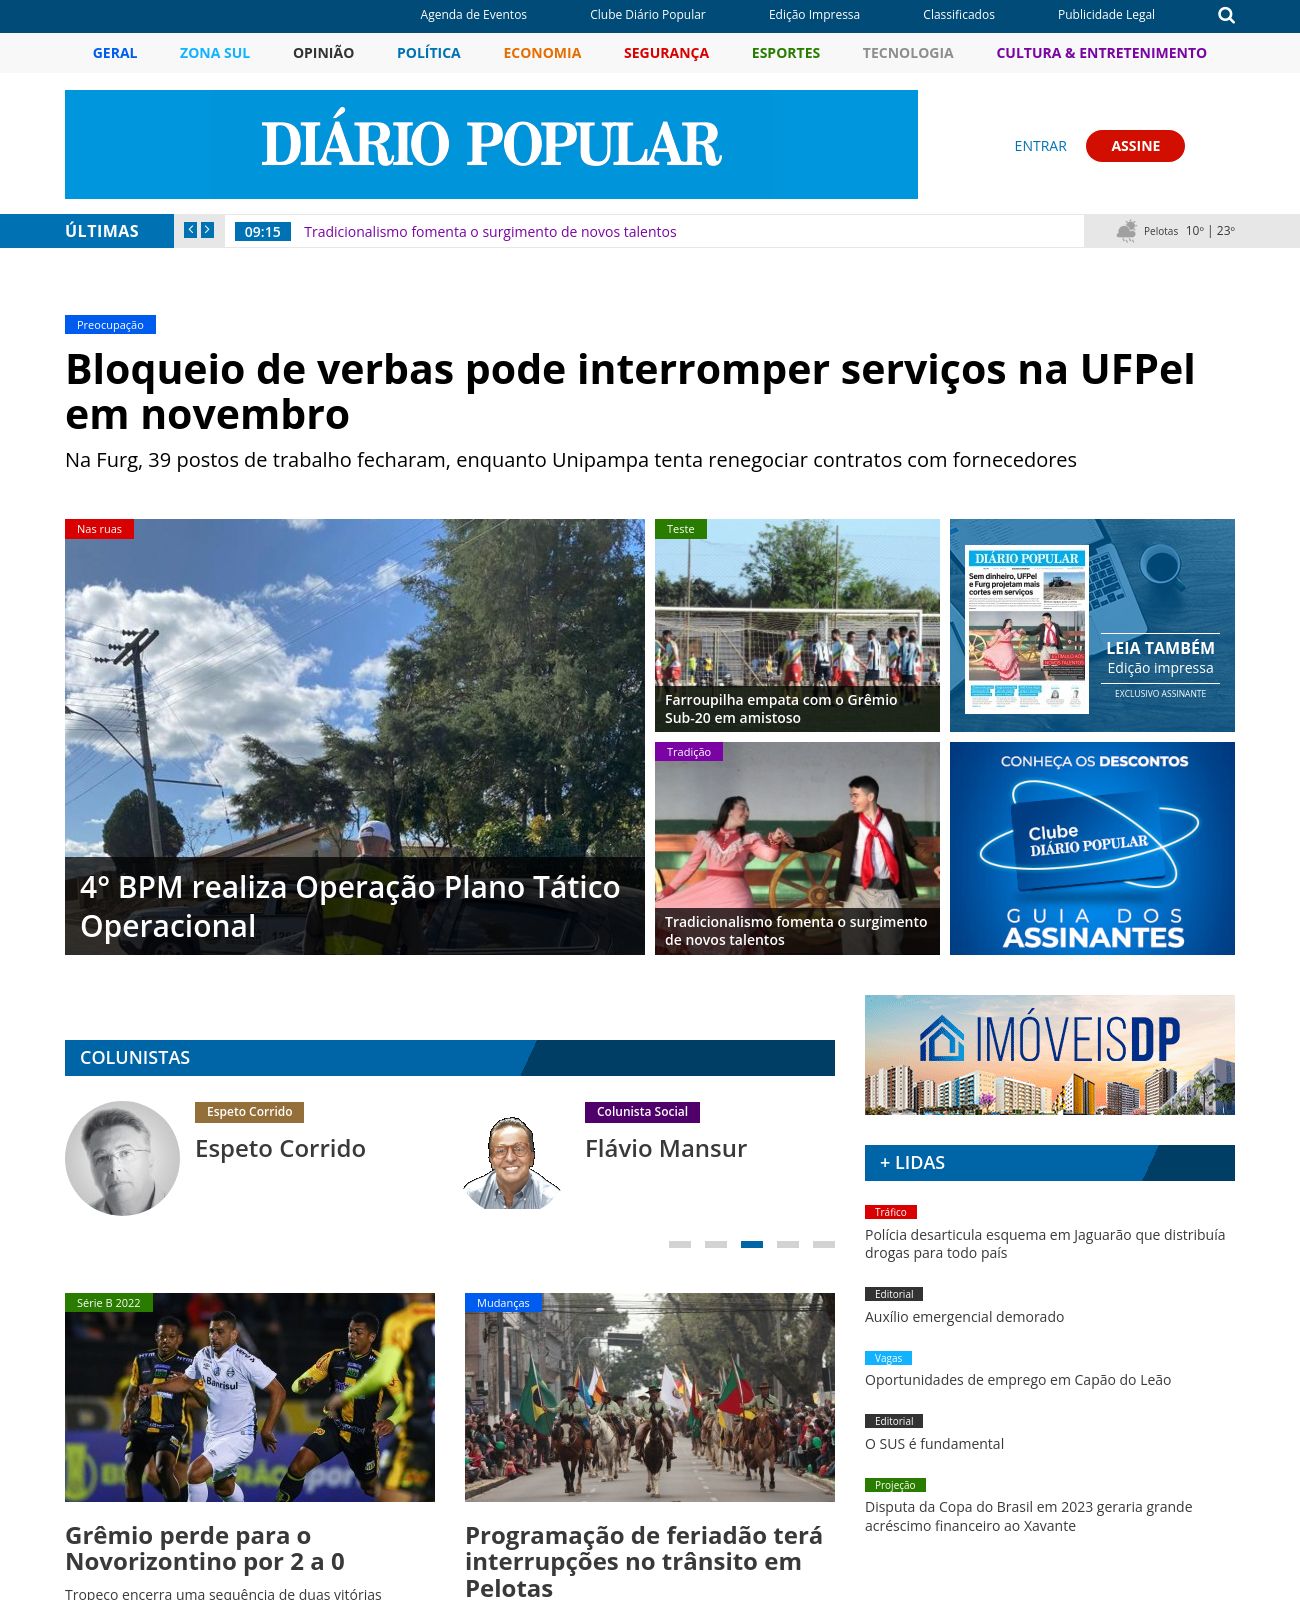 DiÃ¡rio Popular at 2022-09-17 11:50:55-03:00 local time